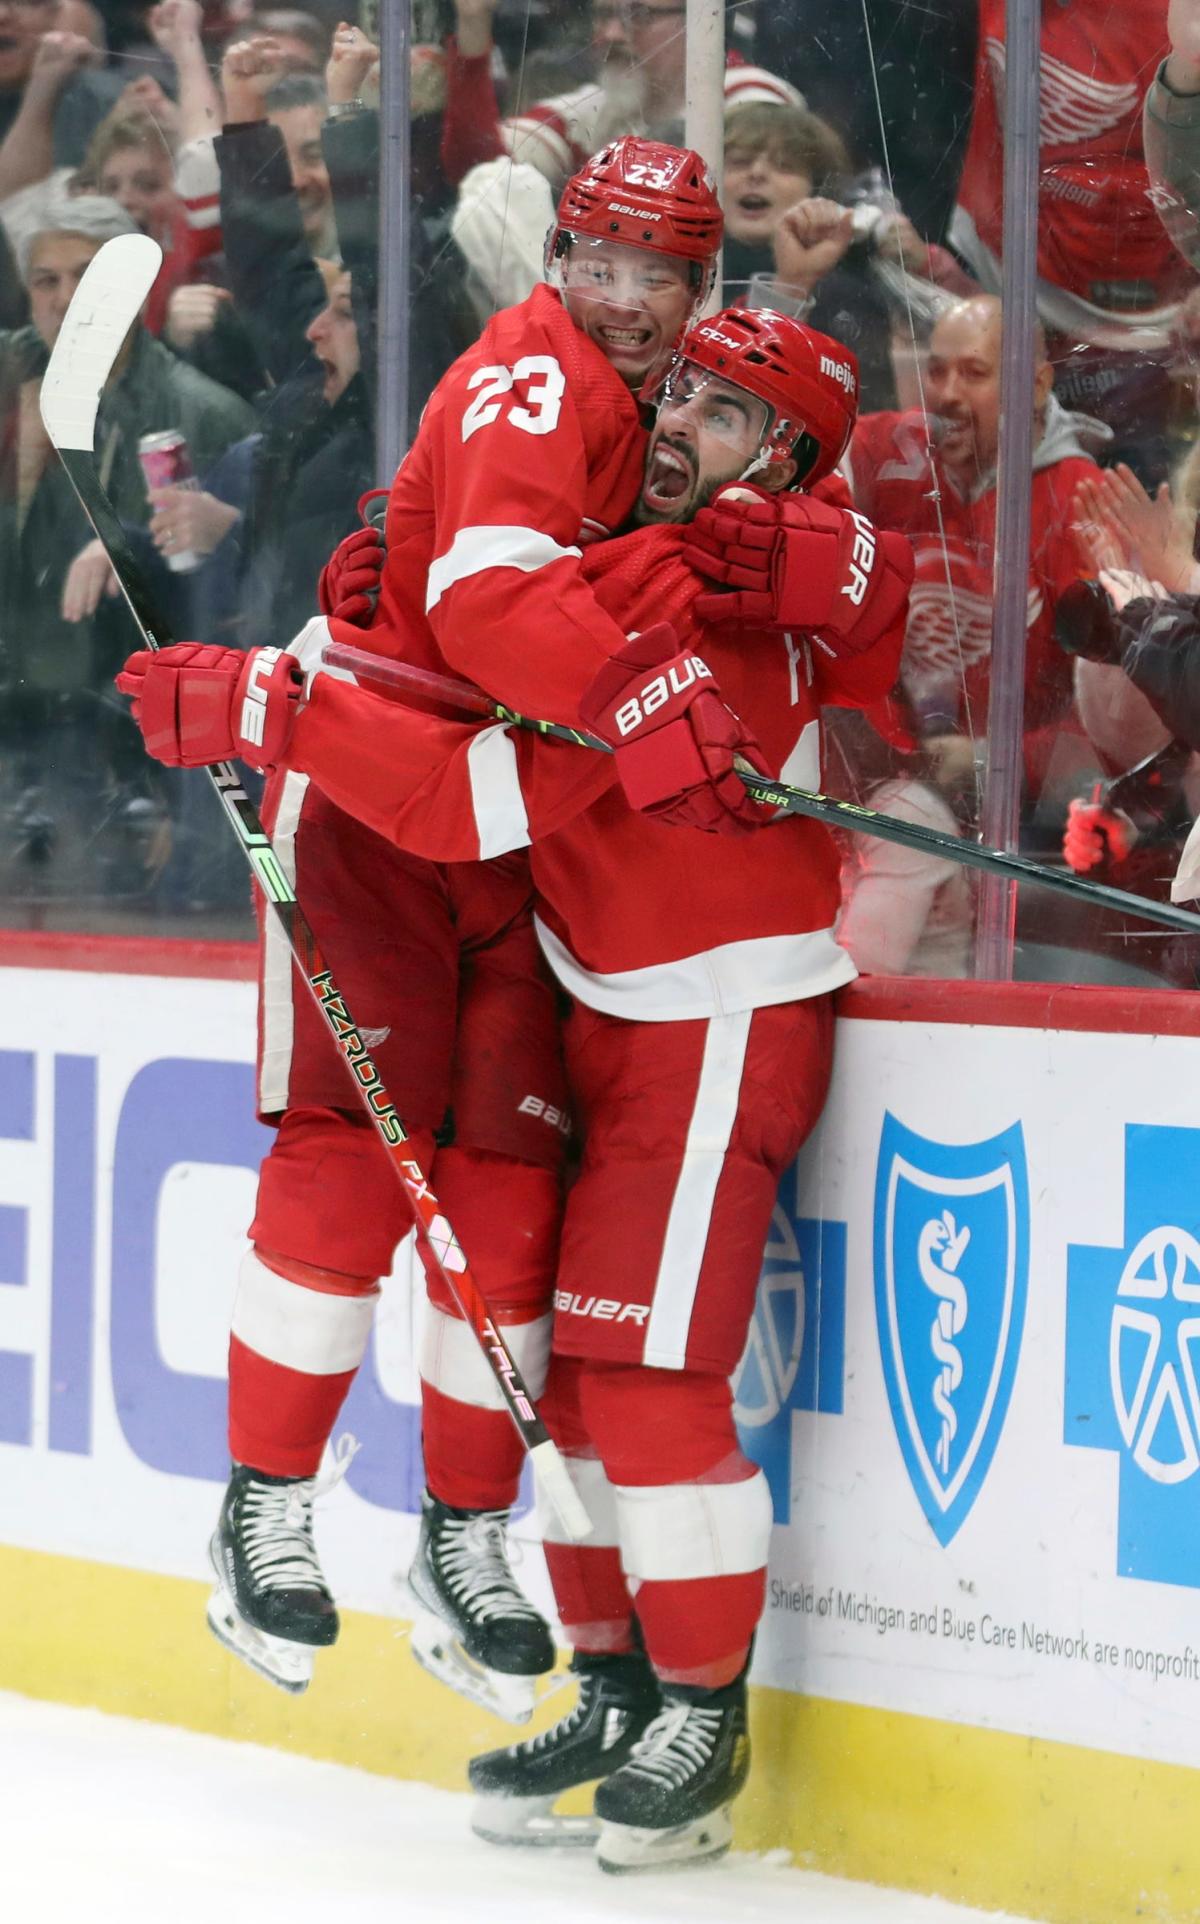 Detroit Red Wings' Moritz Seider: Call-Up Option or Stay in the AHL?